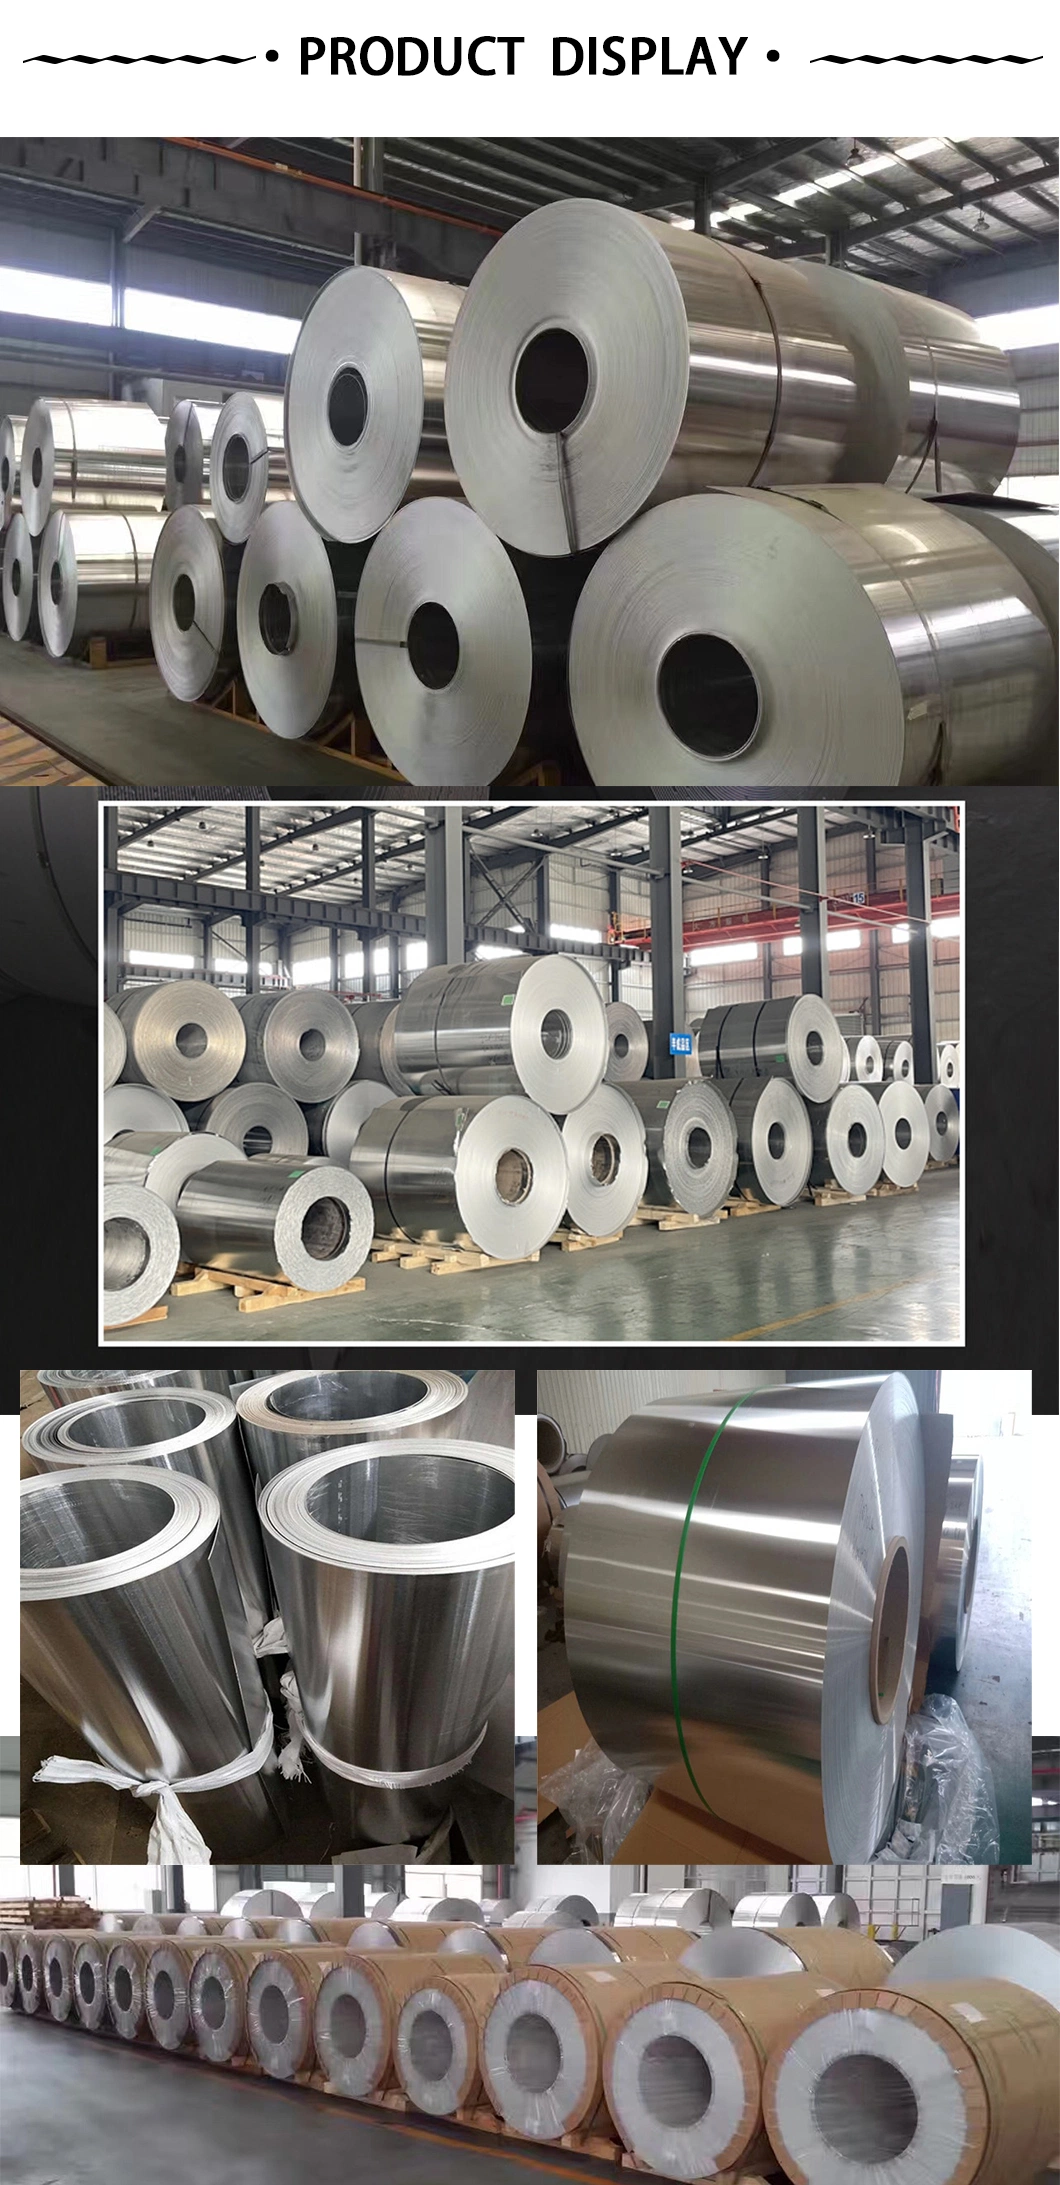 Single Sided Film Coated Aluminum Coil for Stamping 1050 Aluminum Coil